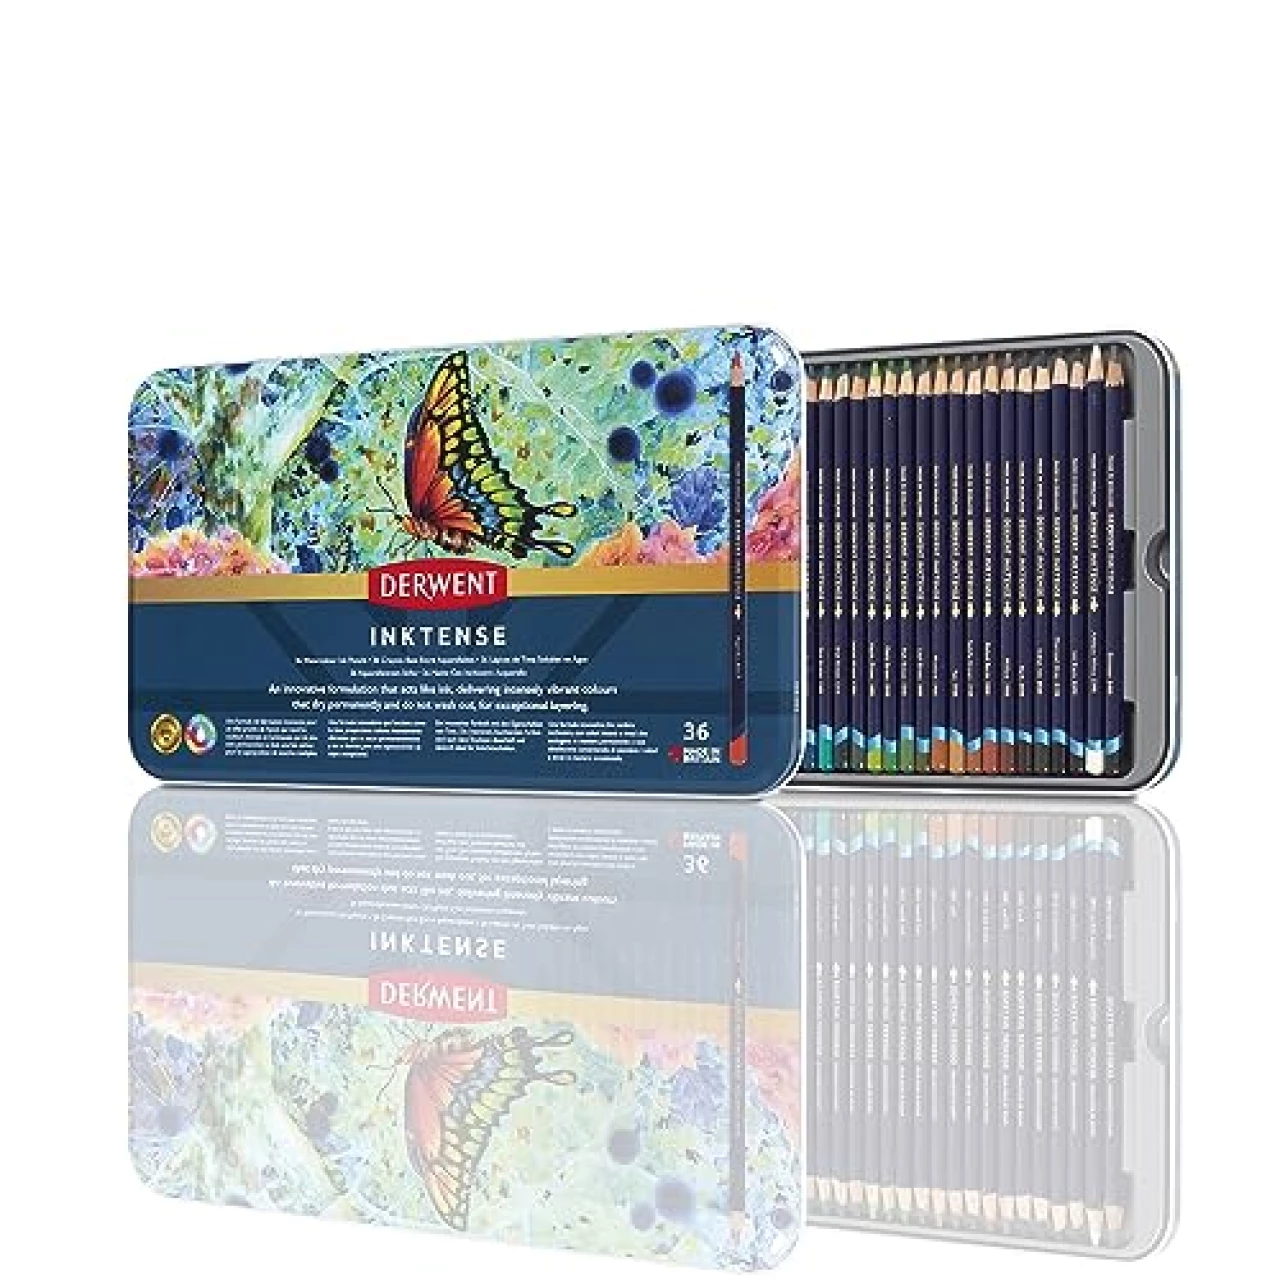 Derwent Inktense Pencils Tin, Set of 36, Great for Holiday Gifts